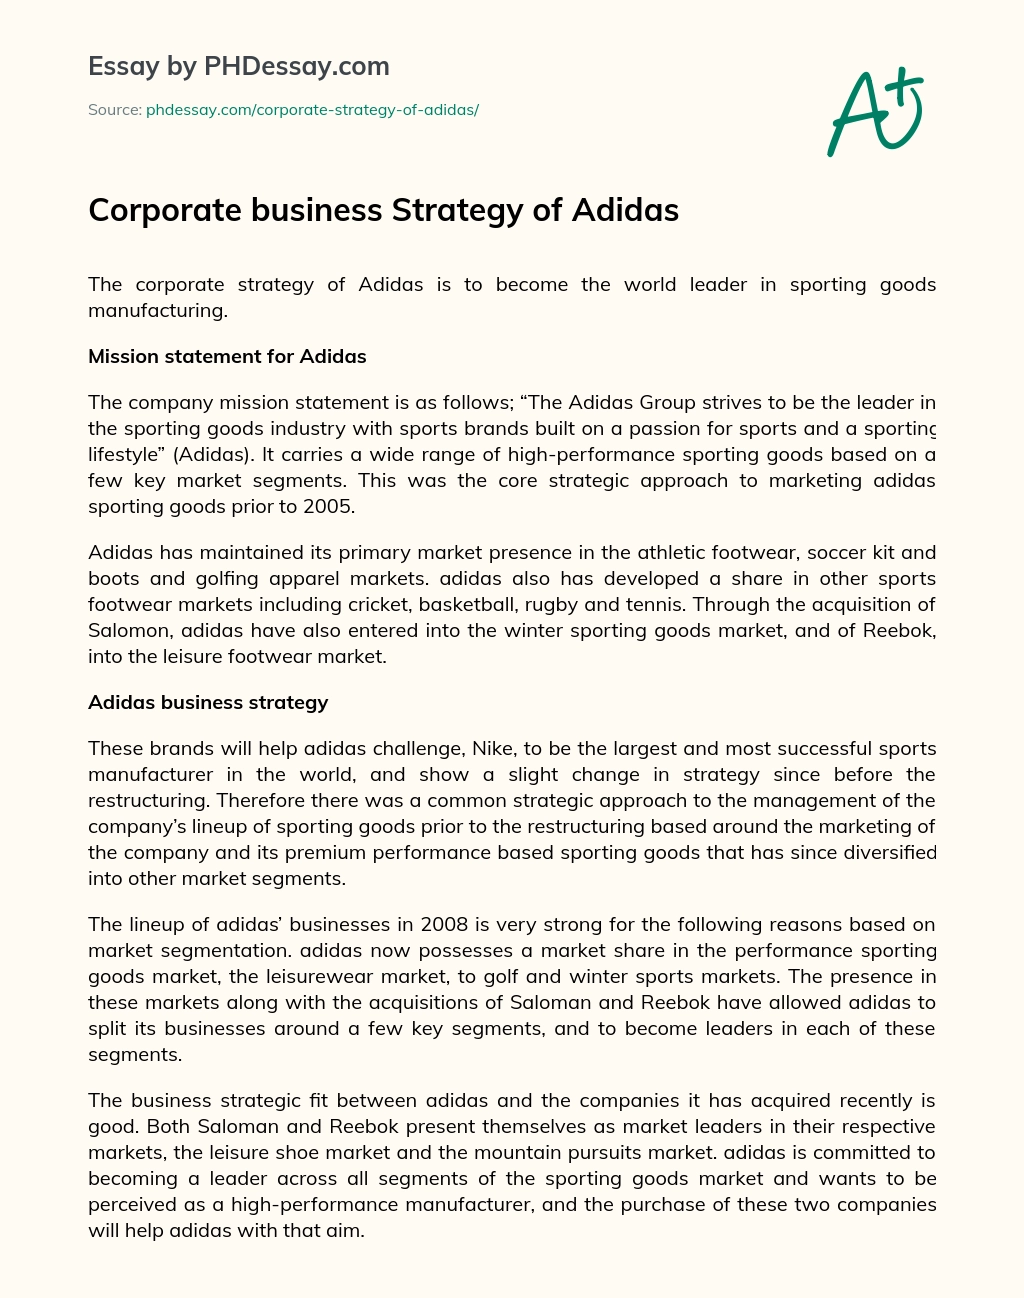 Corporate Business Strategy of Adidas essay